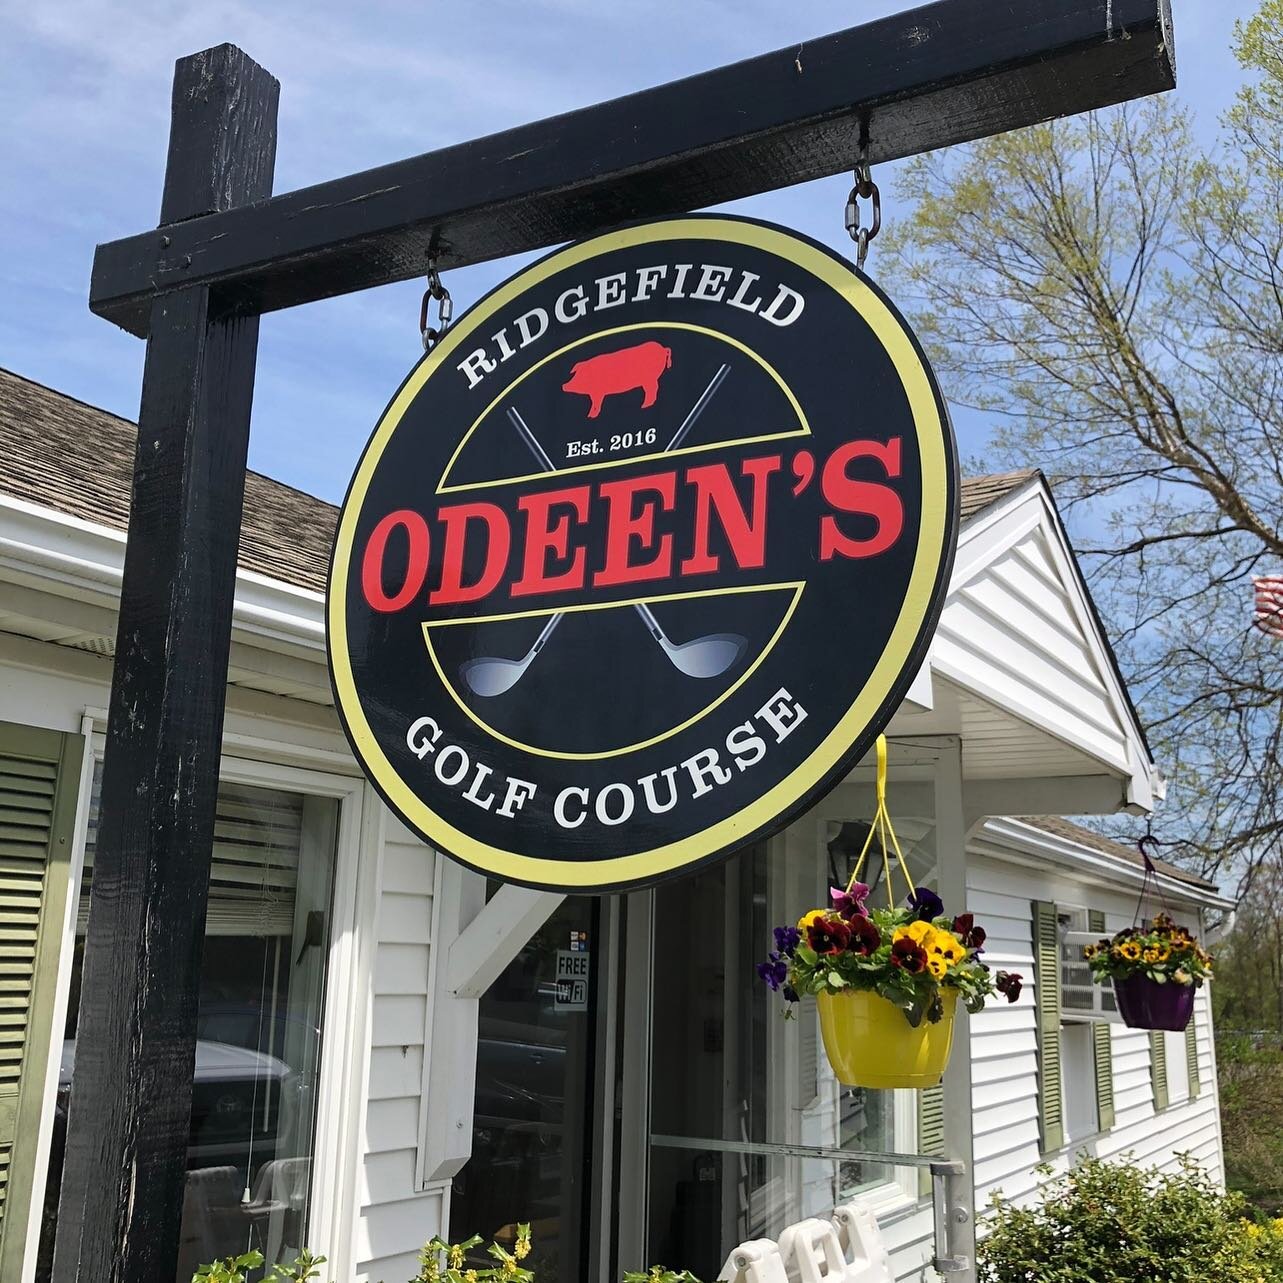 We're Hiring a Bar Cart Operator for Odeens BBQ at Ridgefield Golf Course.

One of the best jobs in the business. 

Drive our converted golf cart around a beautiful golf course serving up drinks and snacks to thirsty golfers. 

Monday - Friday 
8am -